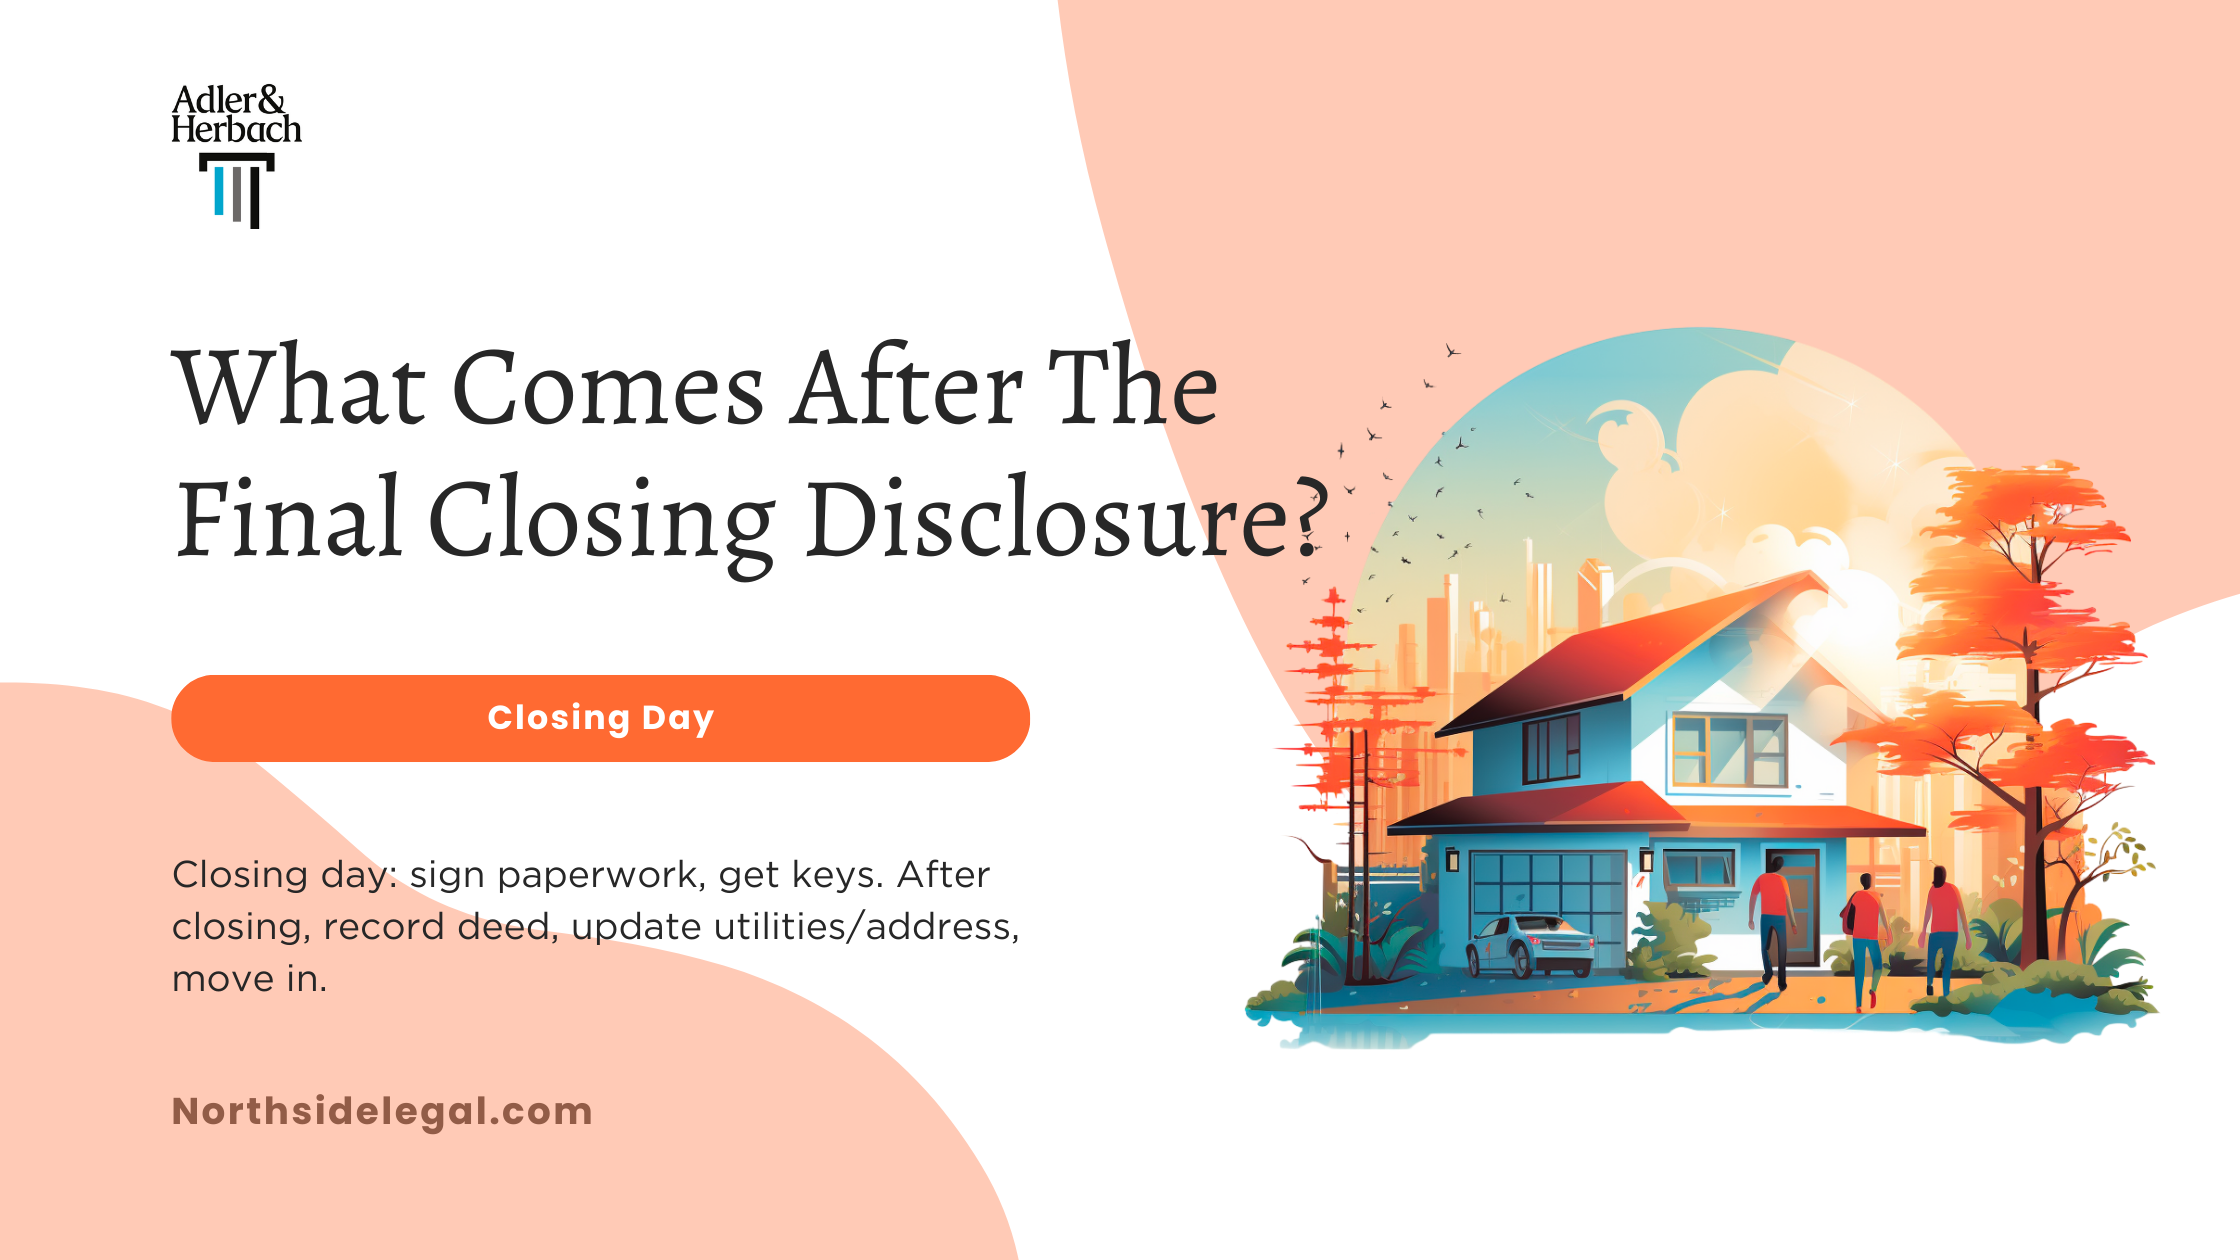 What Comes After The Final Closing Disclosure?